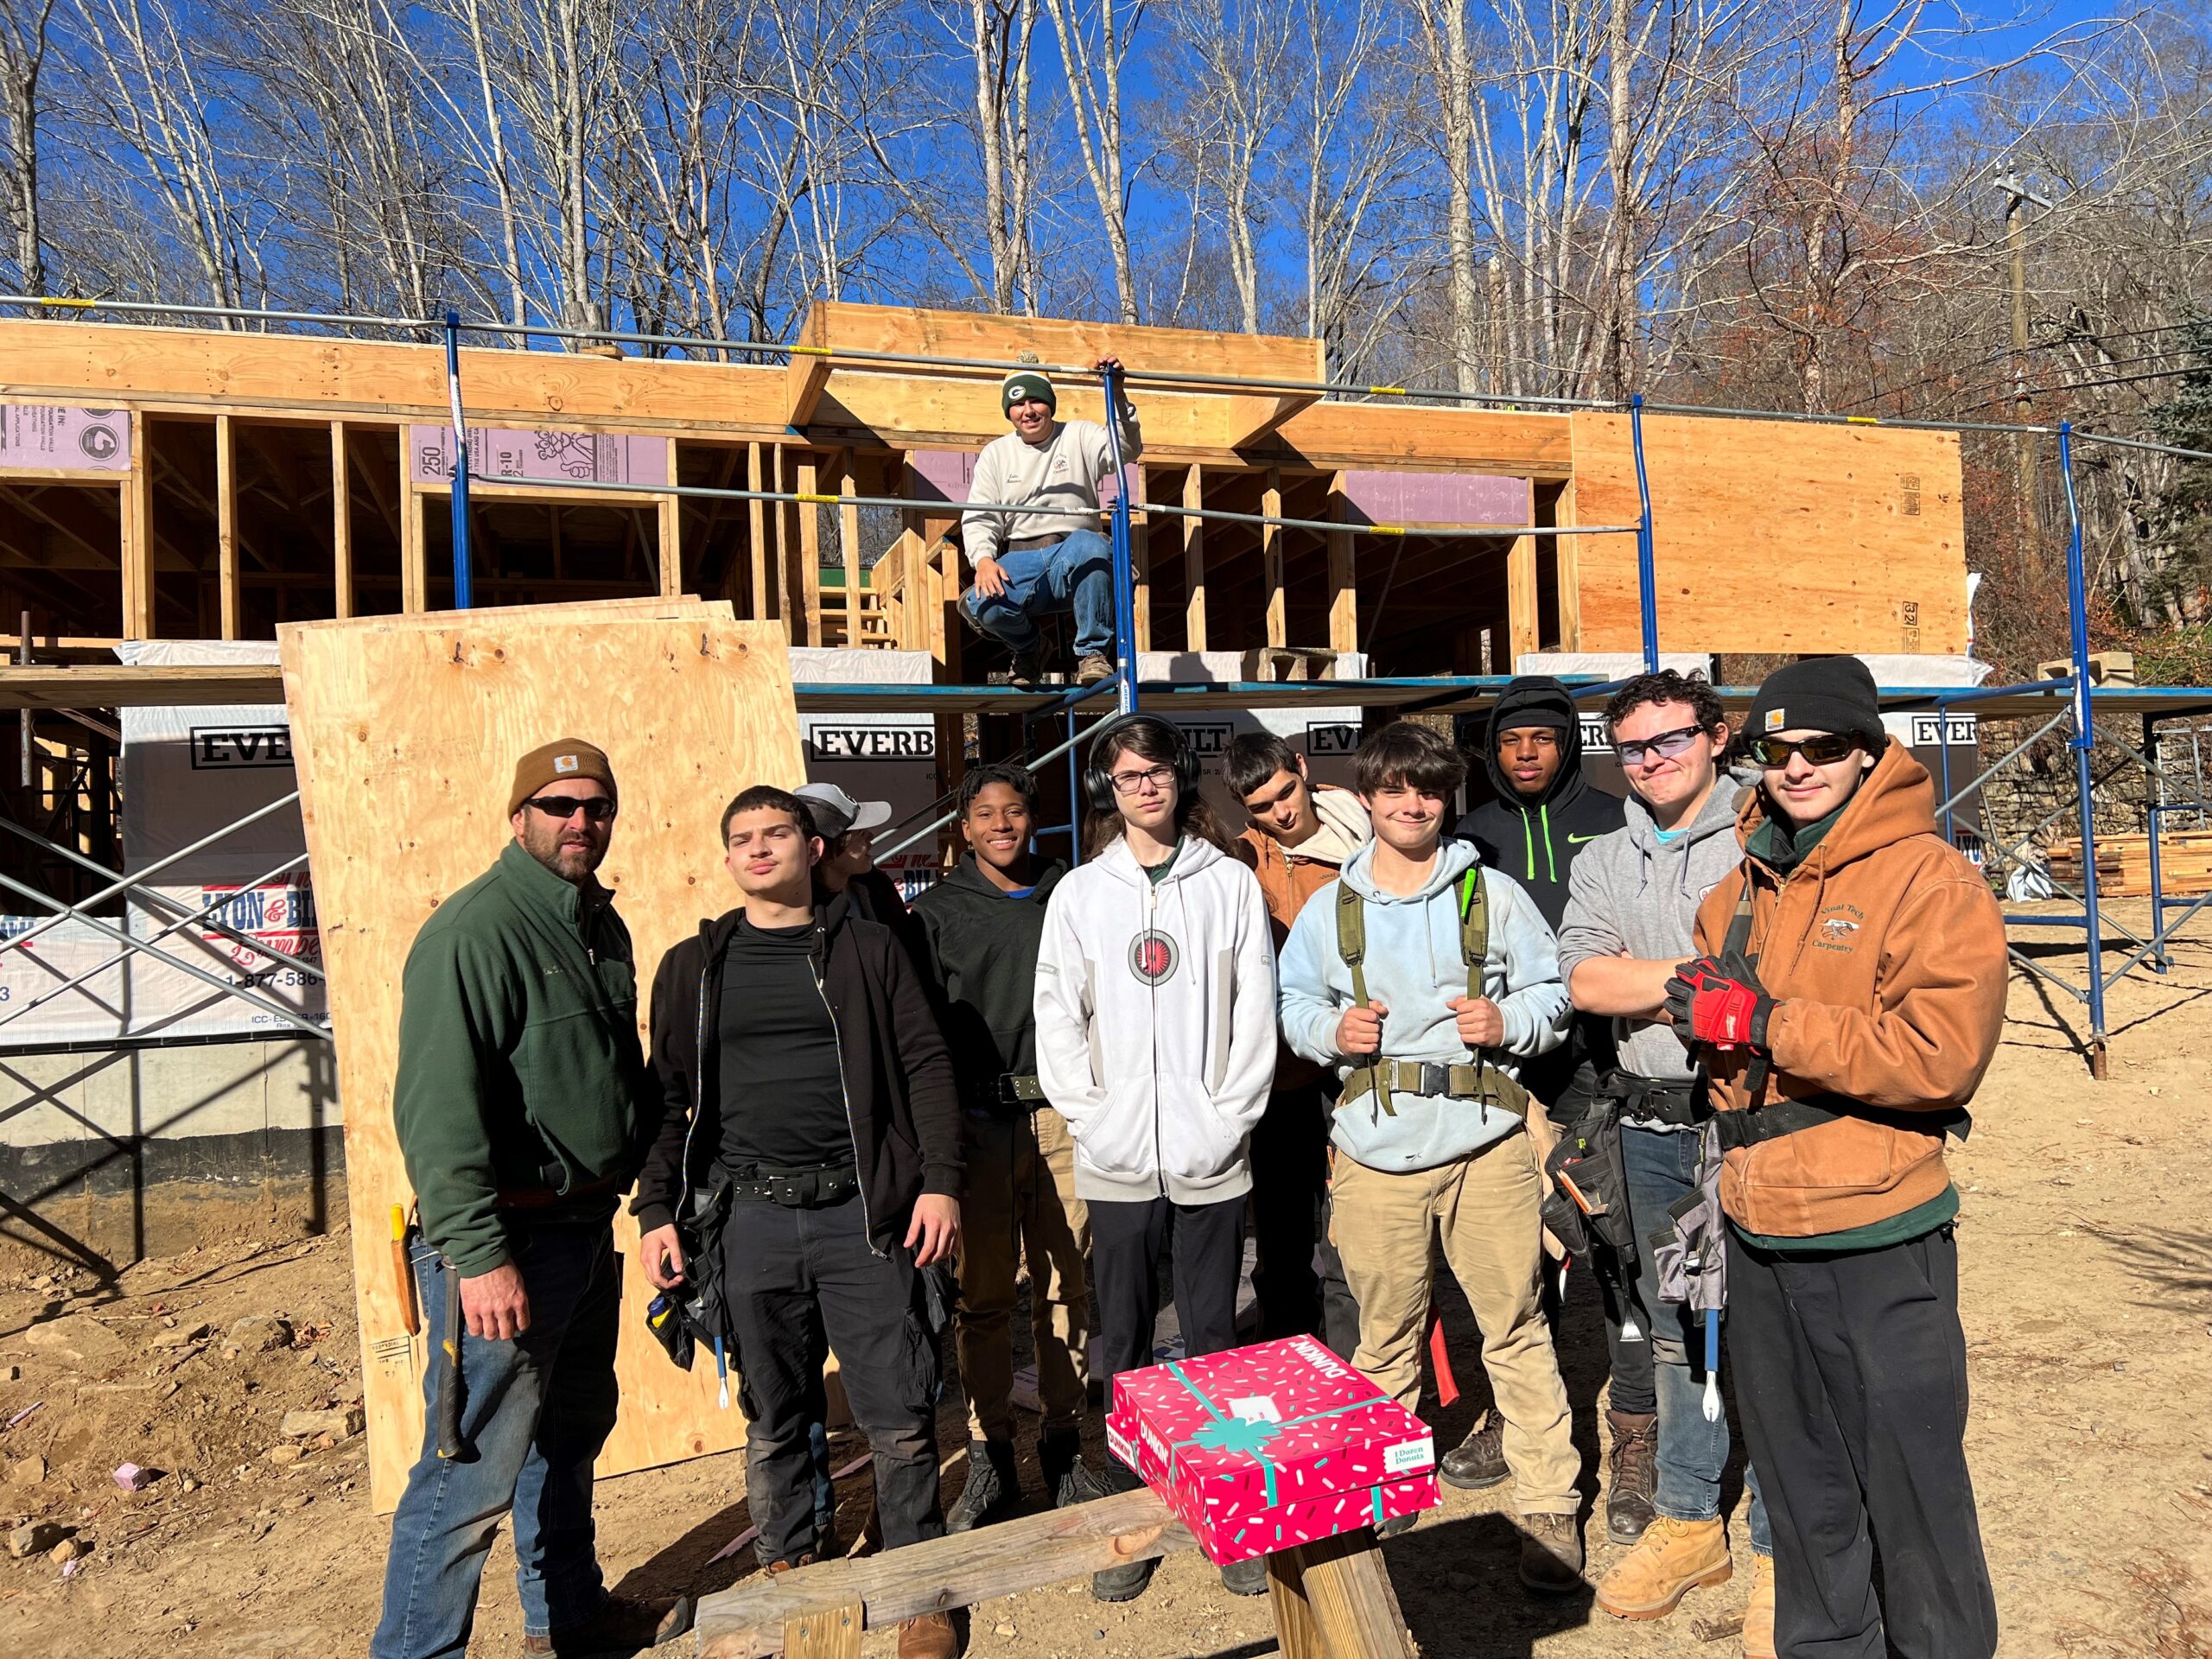 Carpentry students pose for a photo in front of the house that they are building on site.